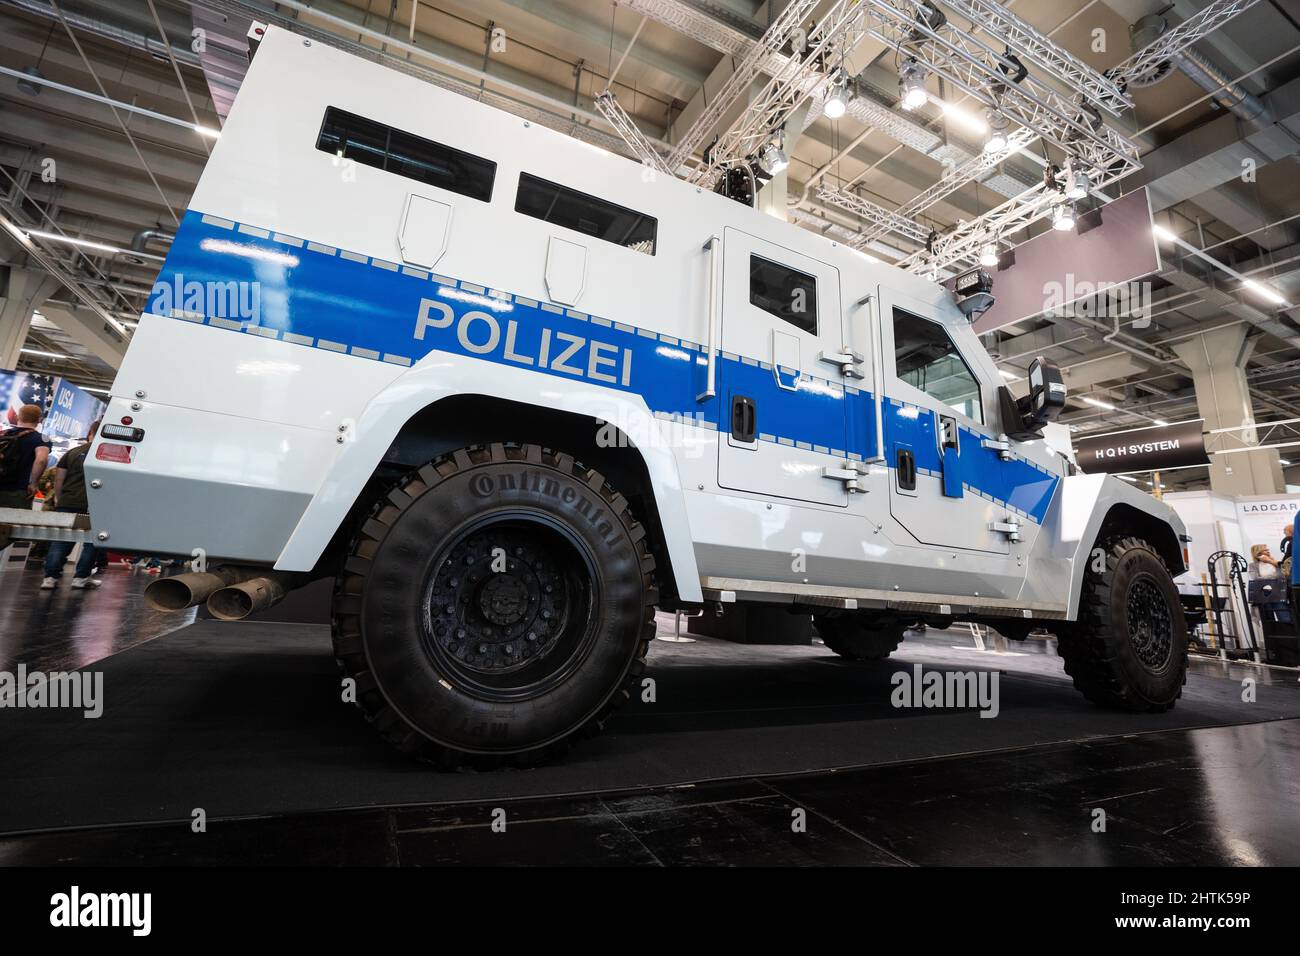 Nuremberg, Germany. 01st Mar, 2022. The armored vehicle of the type 'ATT (Armored Tactical Truck)' of the company 'STOOF' is exhibited at the fair 'Enforce Tac'. The ATT is based on a Ford F-550 4x4, can transport up to 10 forces and is an alternative for urban situations due to its higher speed and small size. The 'Enforce Tac' trade show for security technology, with more than 300 exhibitors, will take place on March 1 and 2. Credit: Nicolas Armer/dpa/Alamy Live News Stock Photo